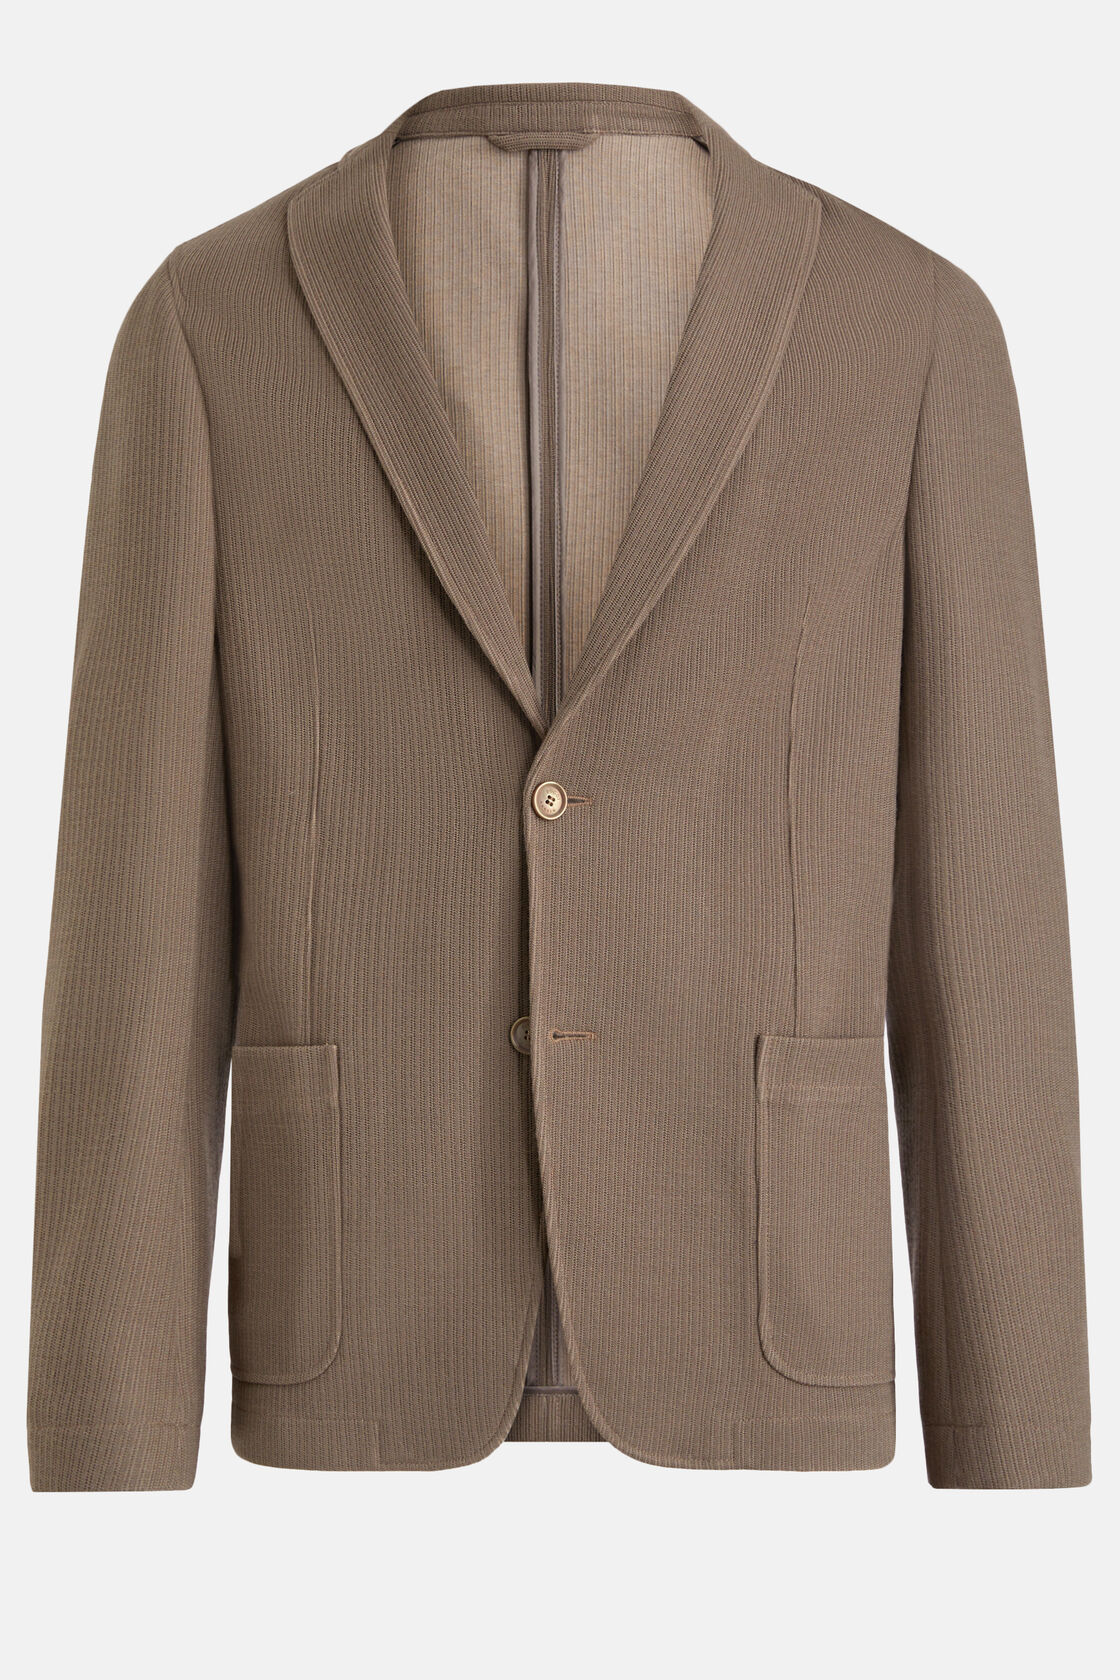 Dove Grey Bridge Jacket in B Jersey Wool and Cotton, Taupe, hi-res